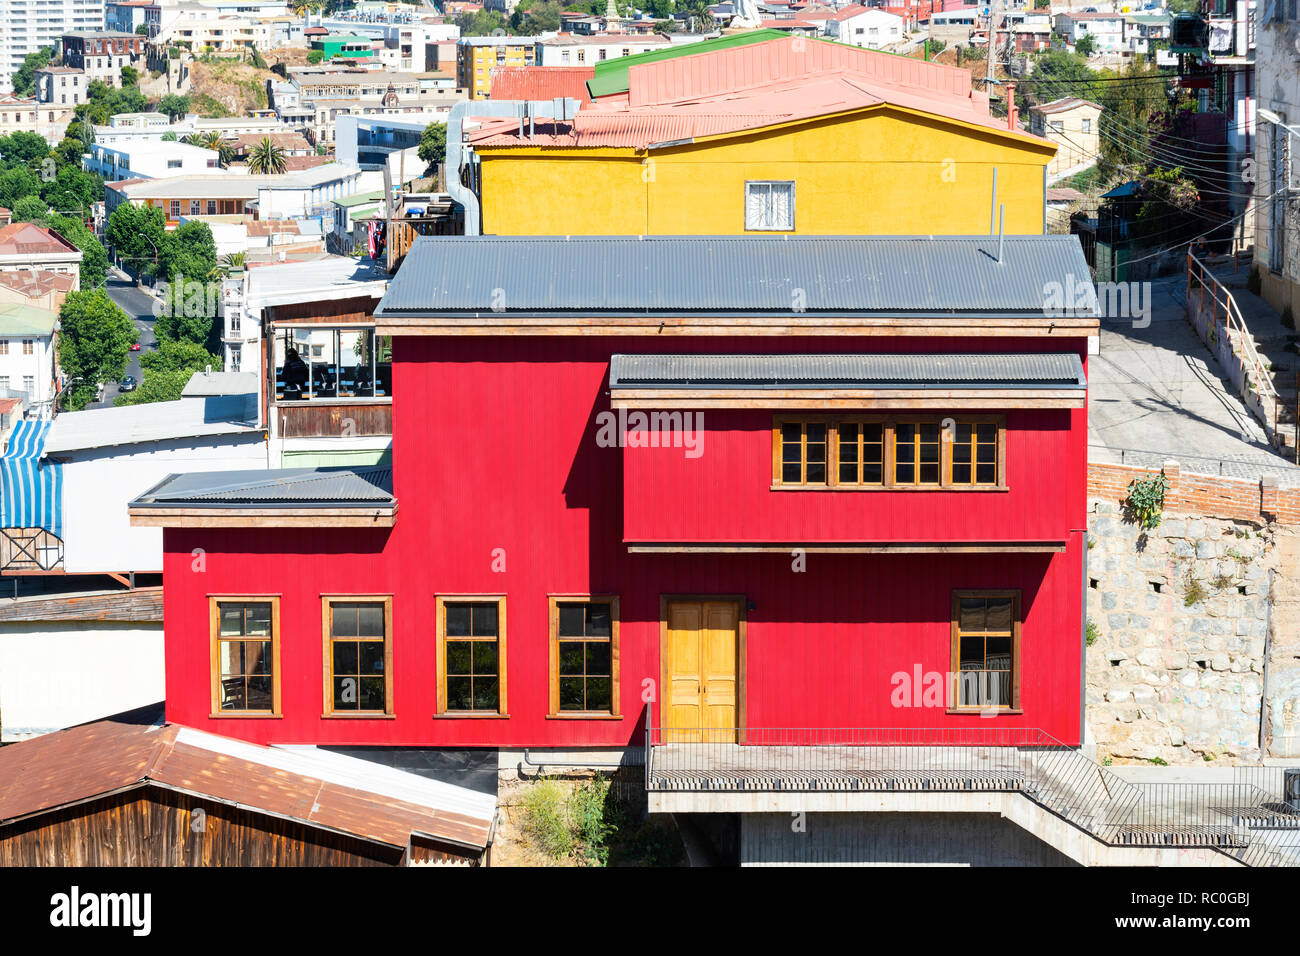 The new looking upper part of Ascensor Espiritu Santo in Valparaiso, which was renovated in 2016. Stock Photo